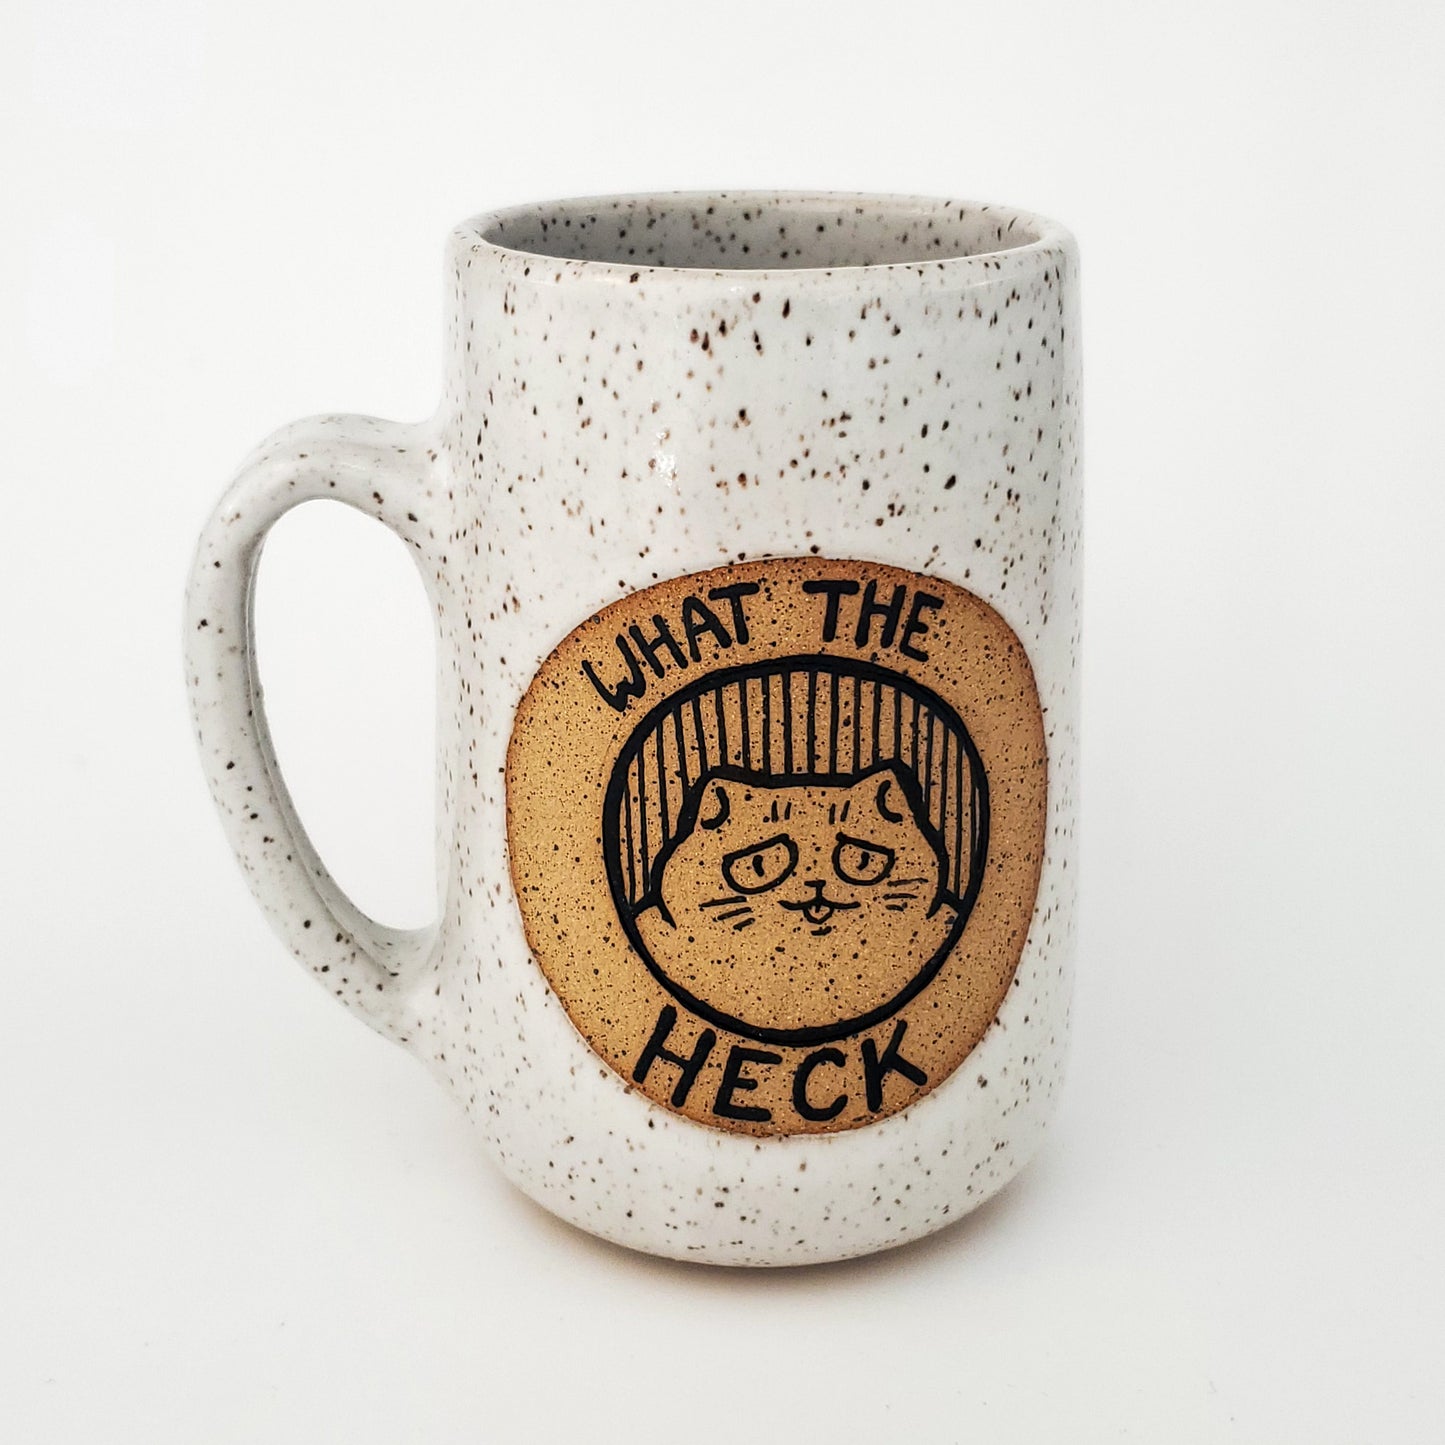 What the Heck? Fuck this Shit, Spiteful Self Care Mug